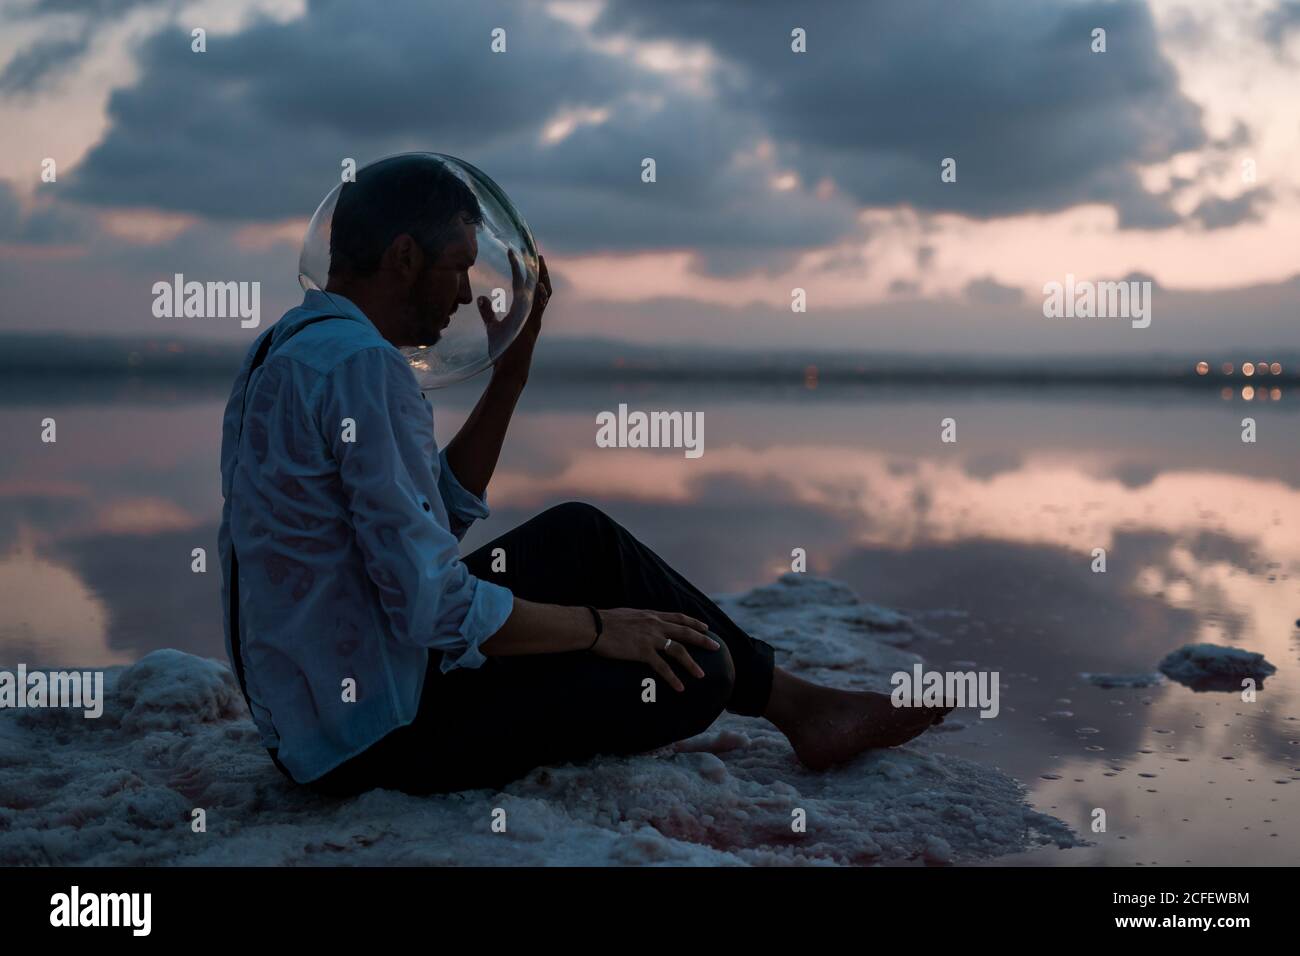 Pensive man with closed eyes in wet shirt taking out empty aquarium on head while sitting still by the seaside in twilight Stock Photo